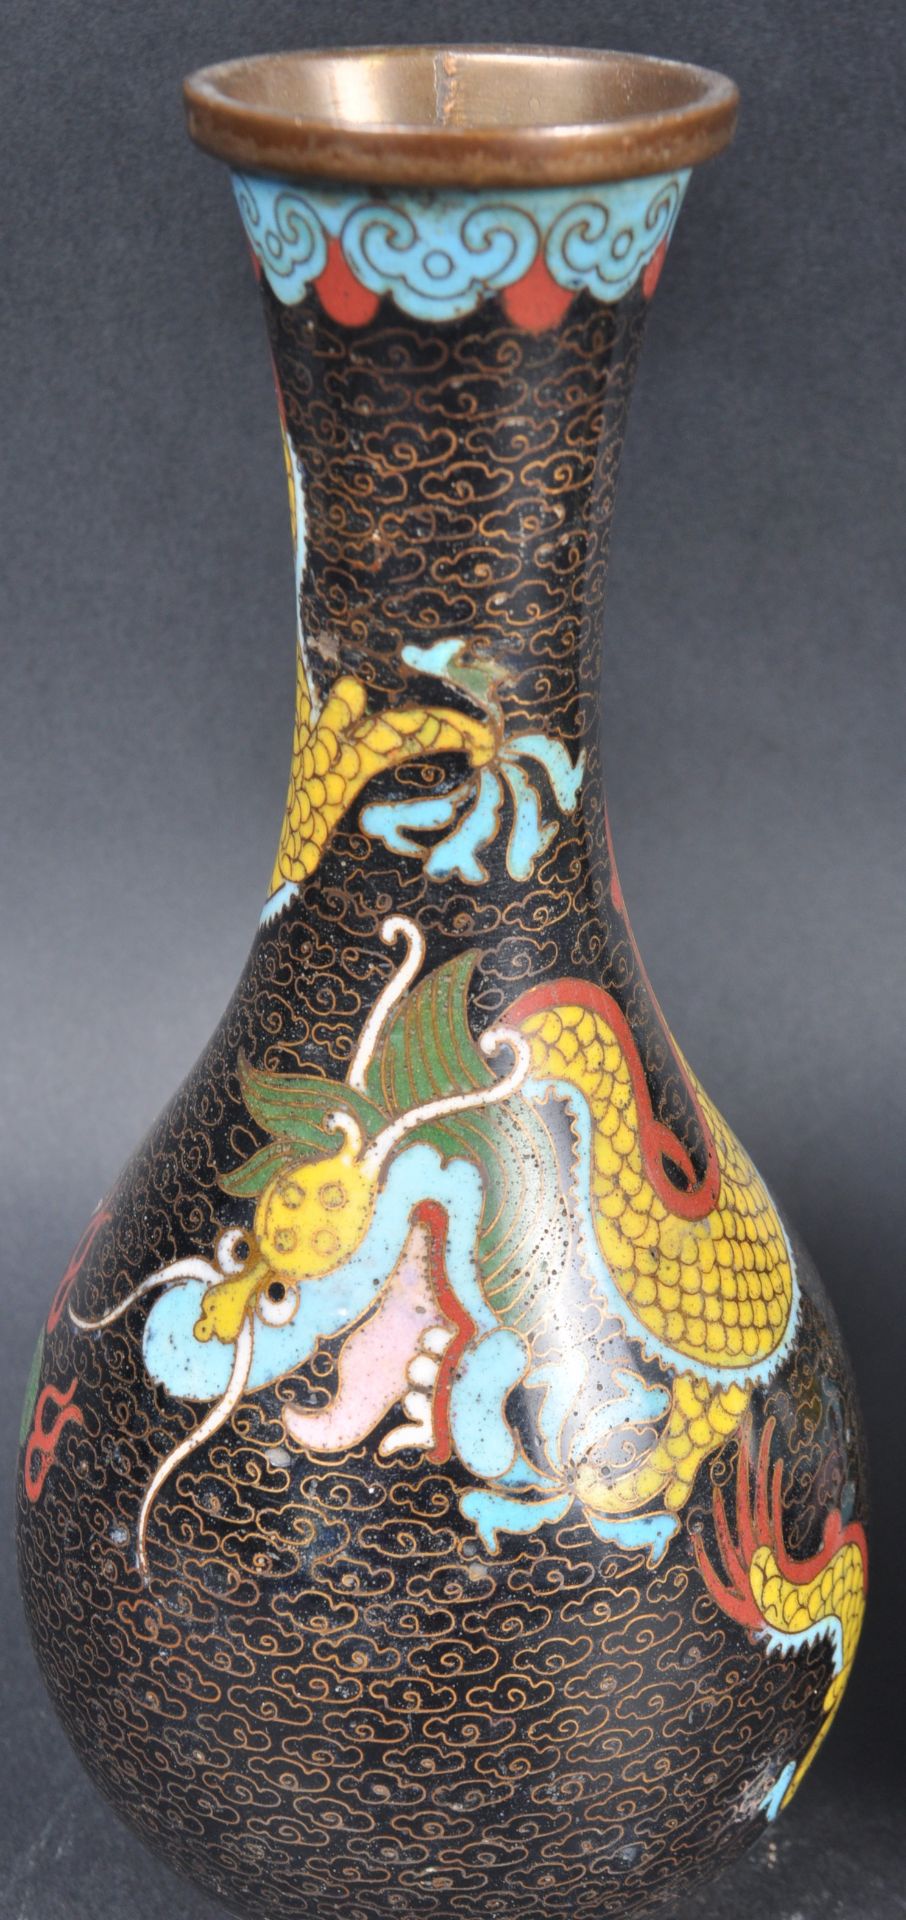 PAIR OF 19TH CENTURY CHINESE CLOISONNE DRAGON VASES - Image 3 of 7